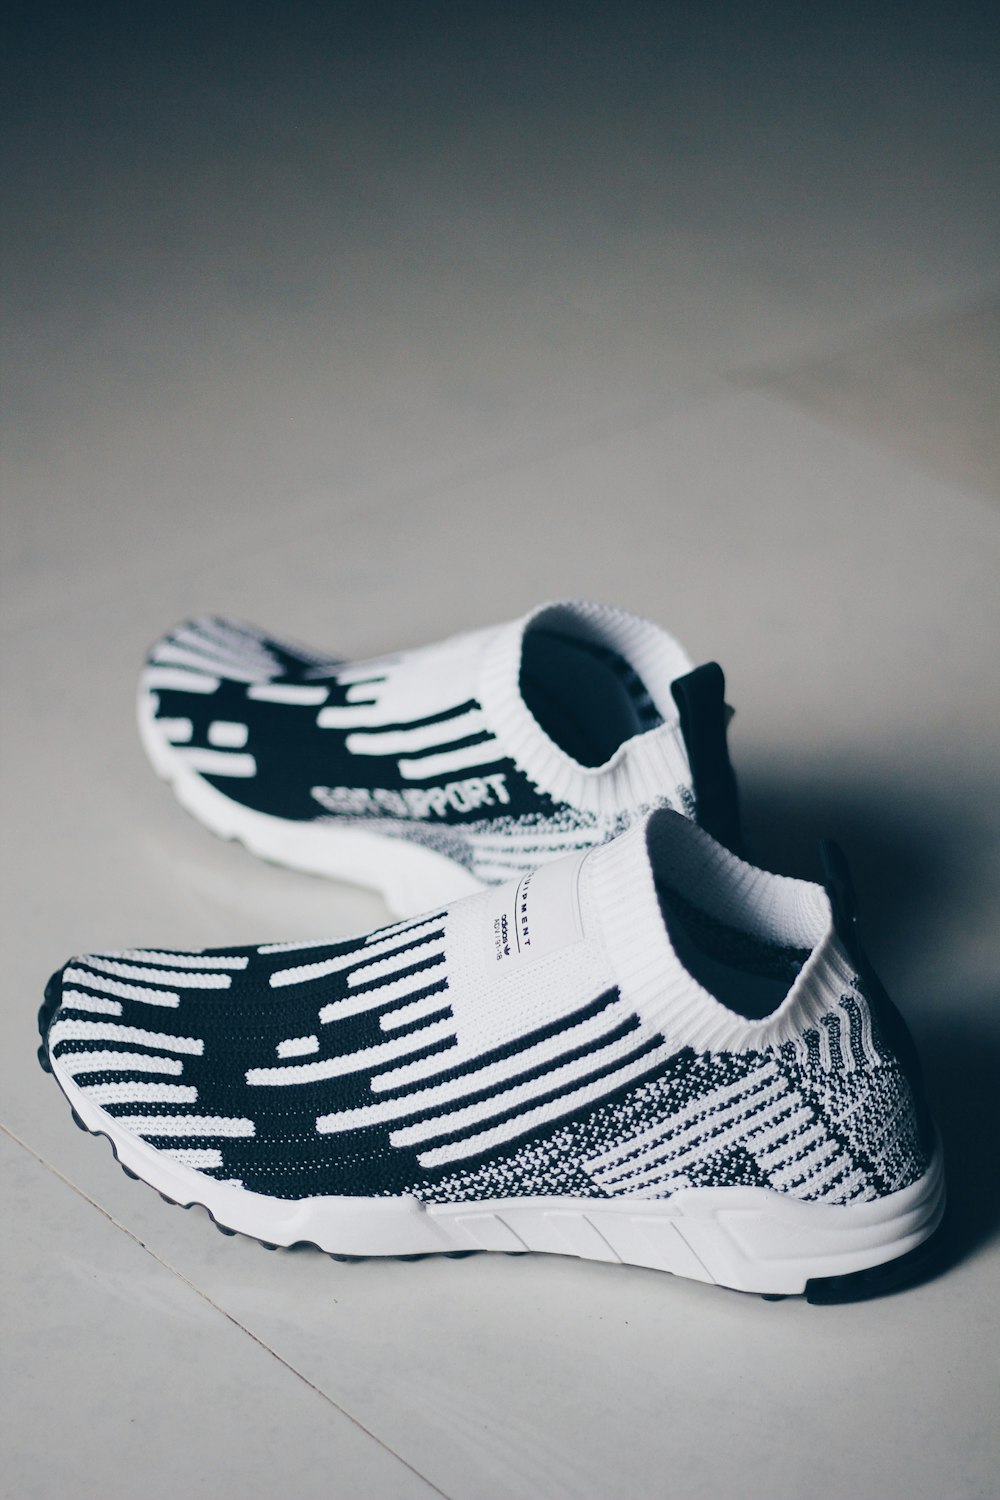 shallow focus photo of pair of white-and-black running shoes